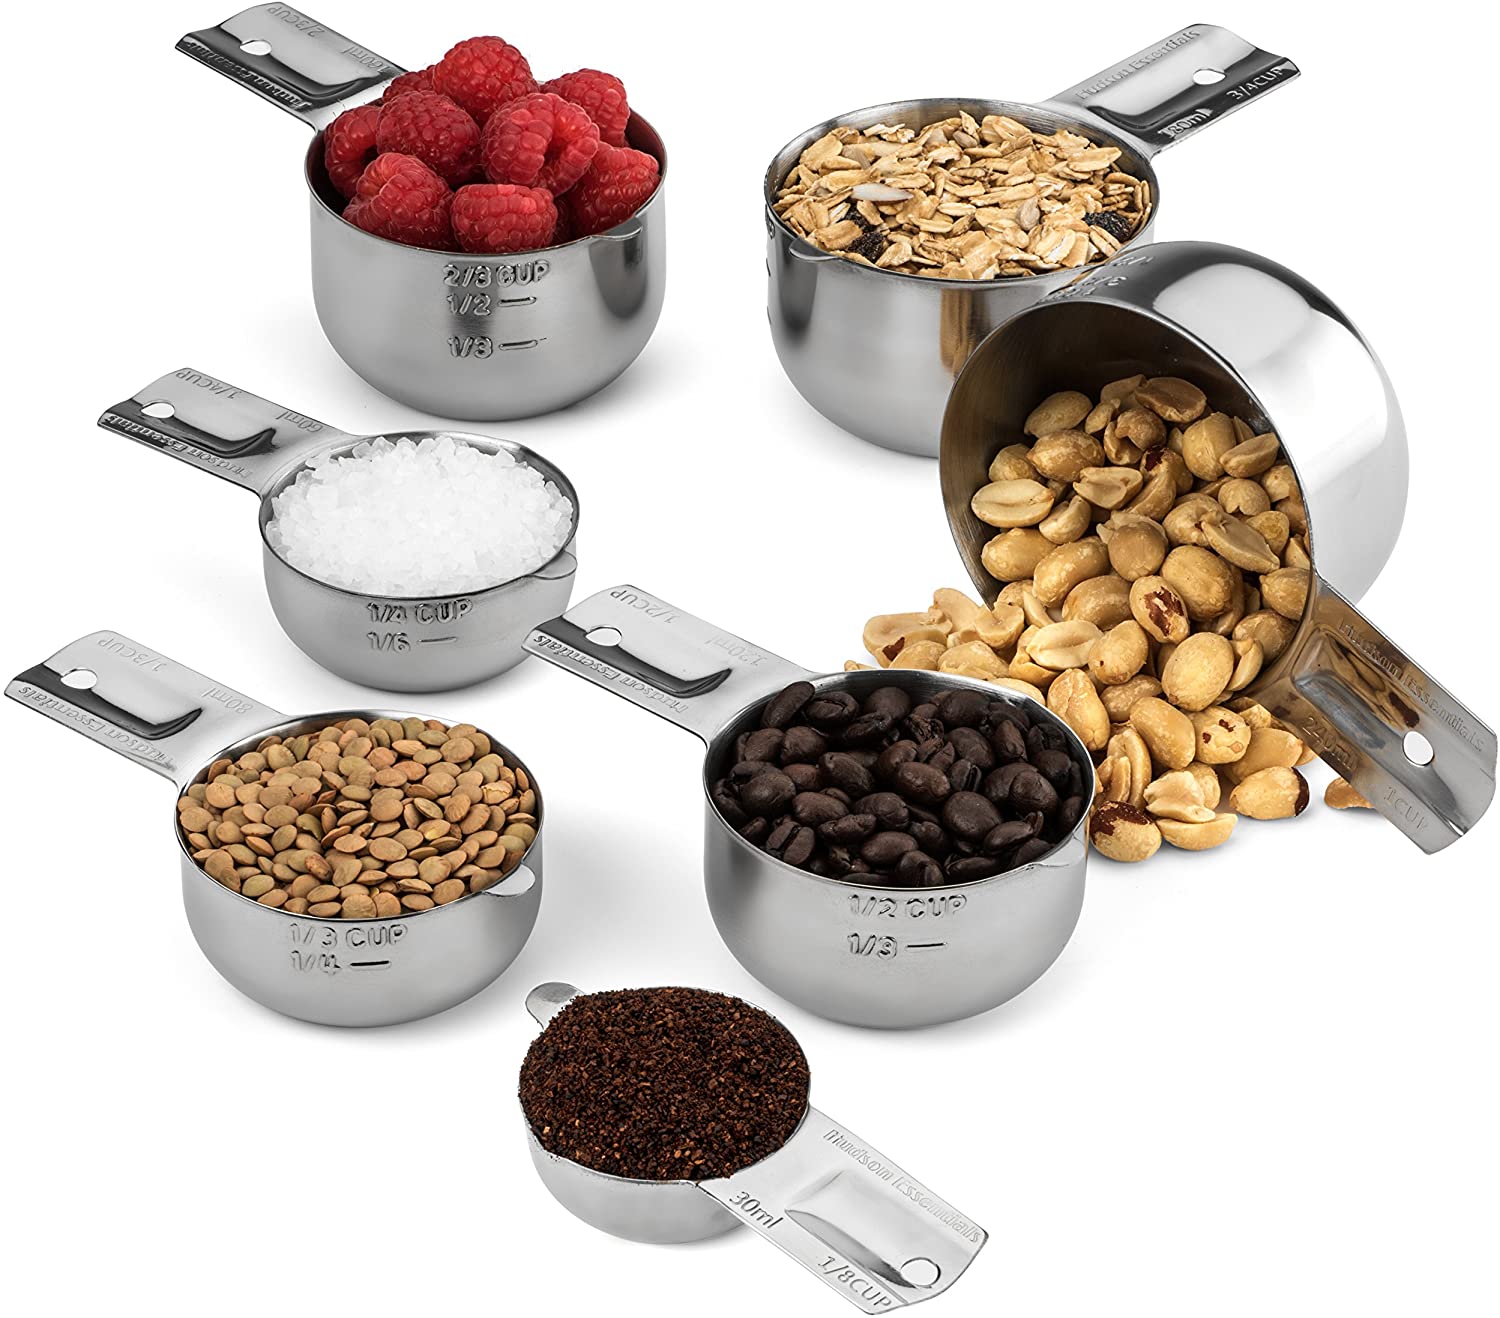 Hudson Essentials Stainless Steel Measuring Cups and Spoons Set (1 Piece 2-Cup)